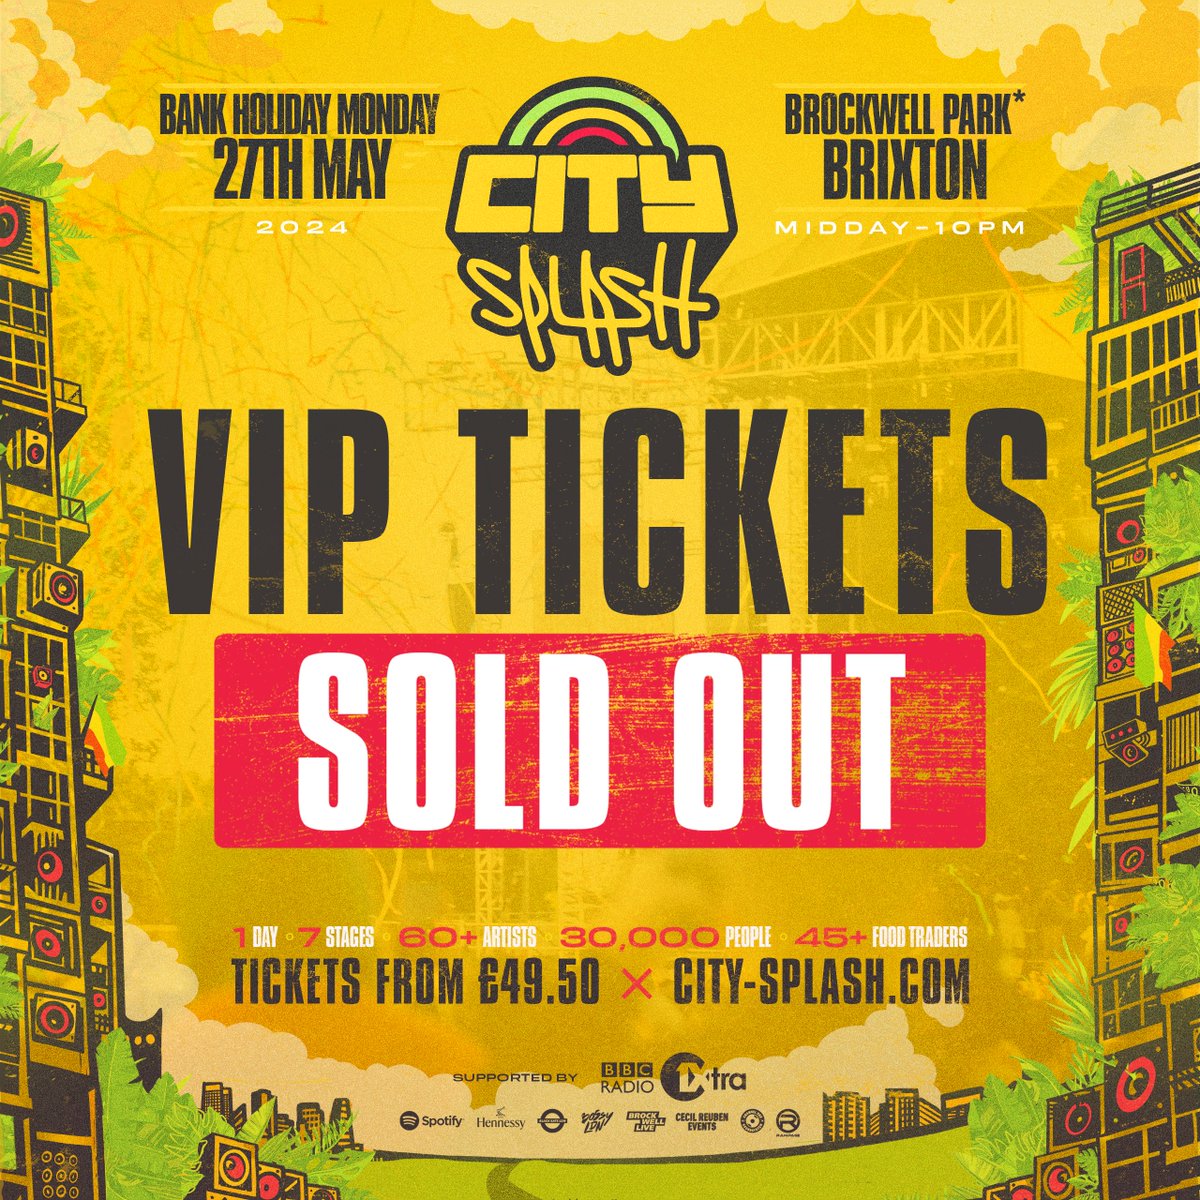 TINGS ARE GETTING SERIOUS! 🚨VIP TICKETS NOW SOLD OUT 🚨 Less than 3 WEEKS left ‘til we come together at the world’s BIGGEST one day celebration of Reggae, Dancehall, Afrobeats & beyond.🔥🔥🔥 🔊TICKETS ARE SELLING FAST! If you wanna step with us, this is your warning to lock…